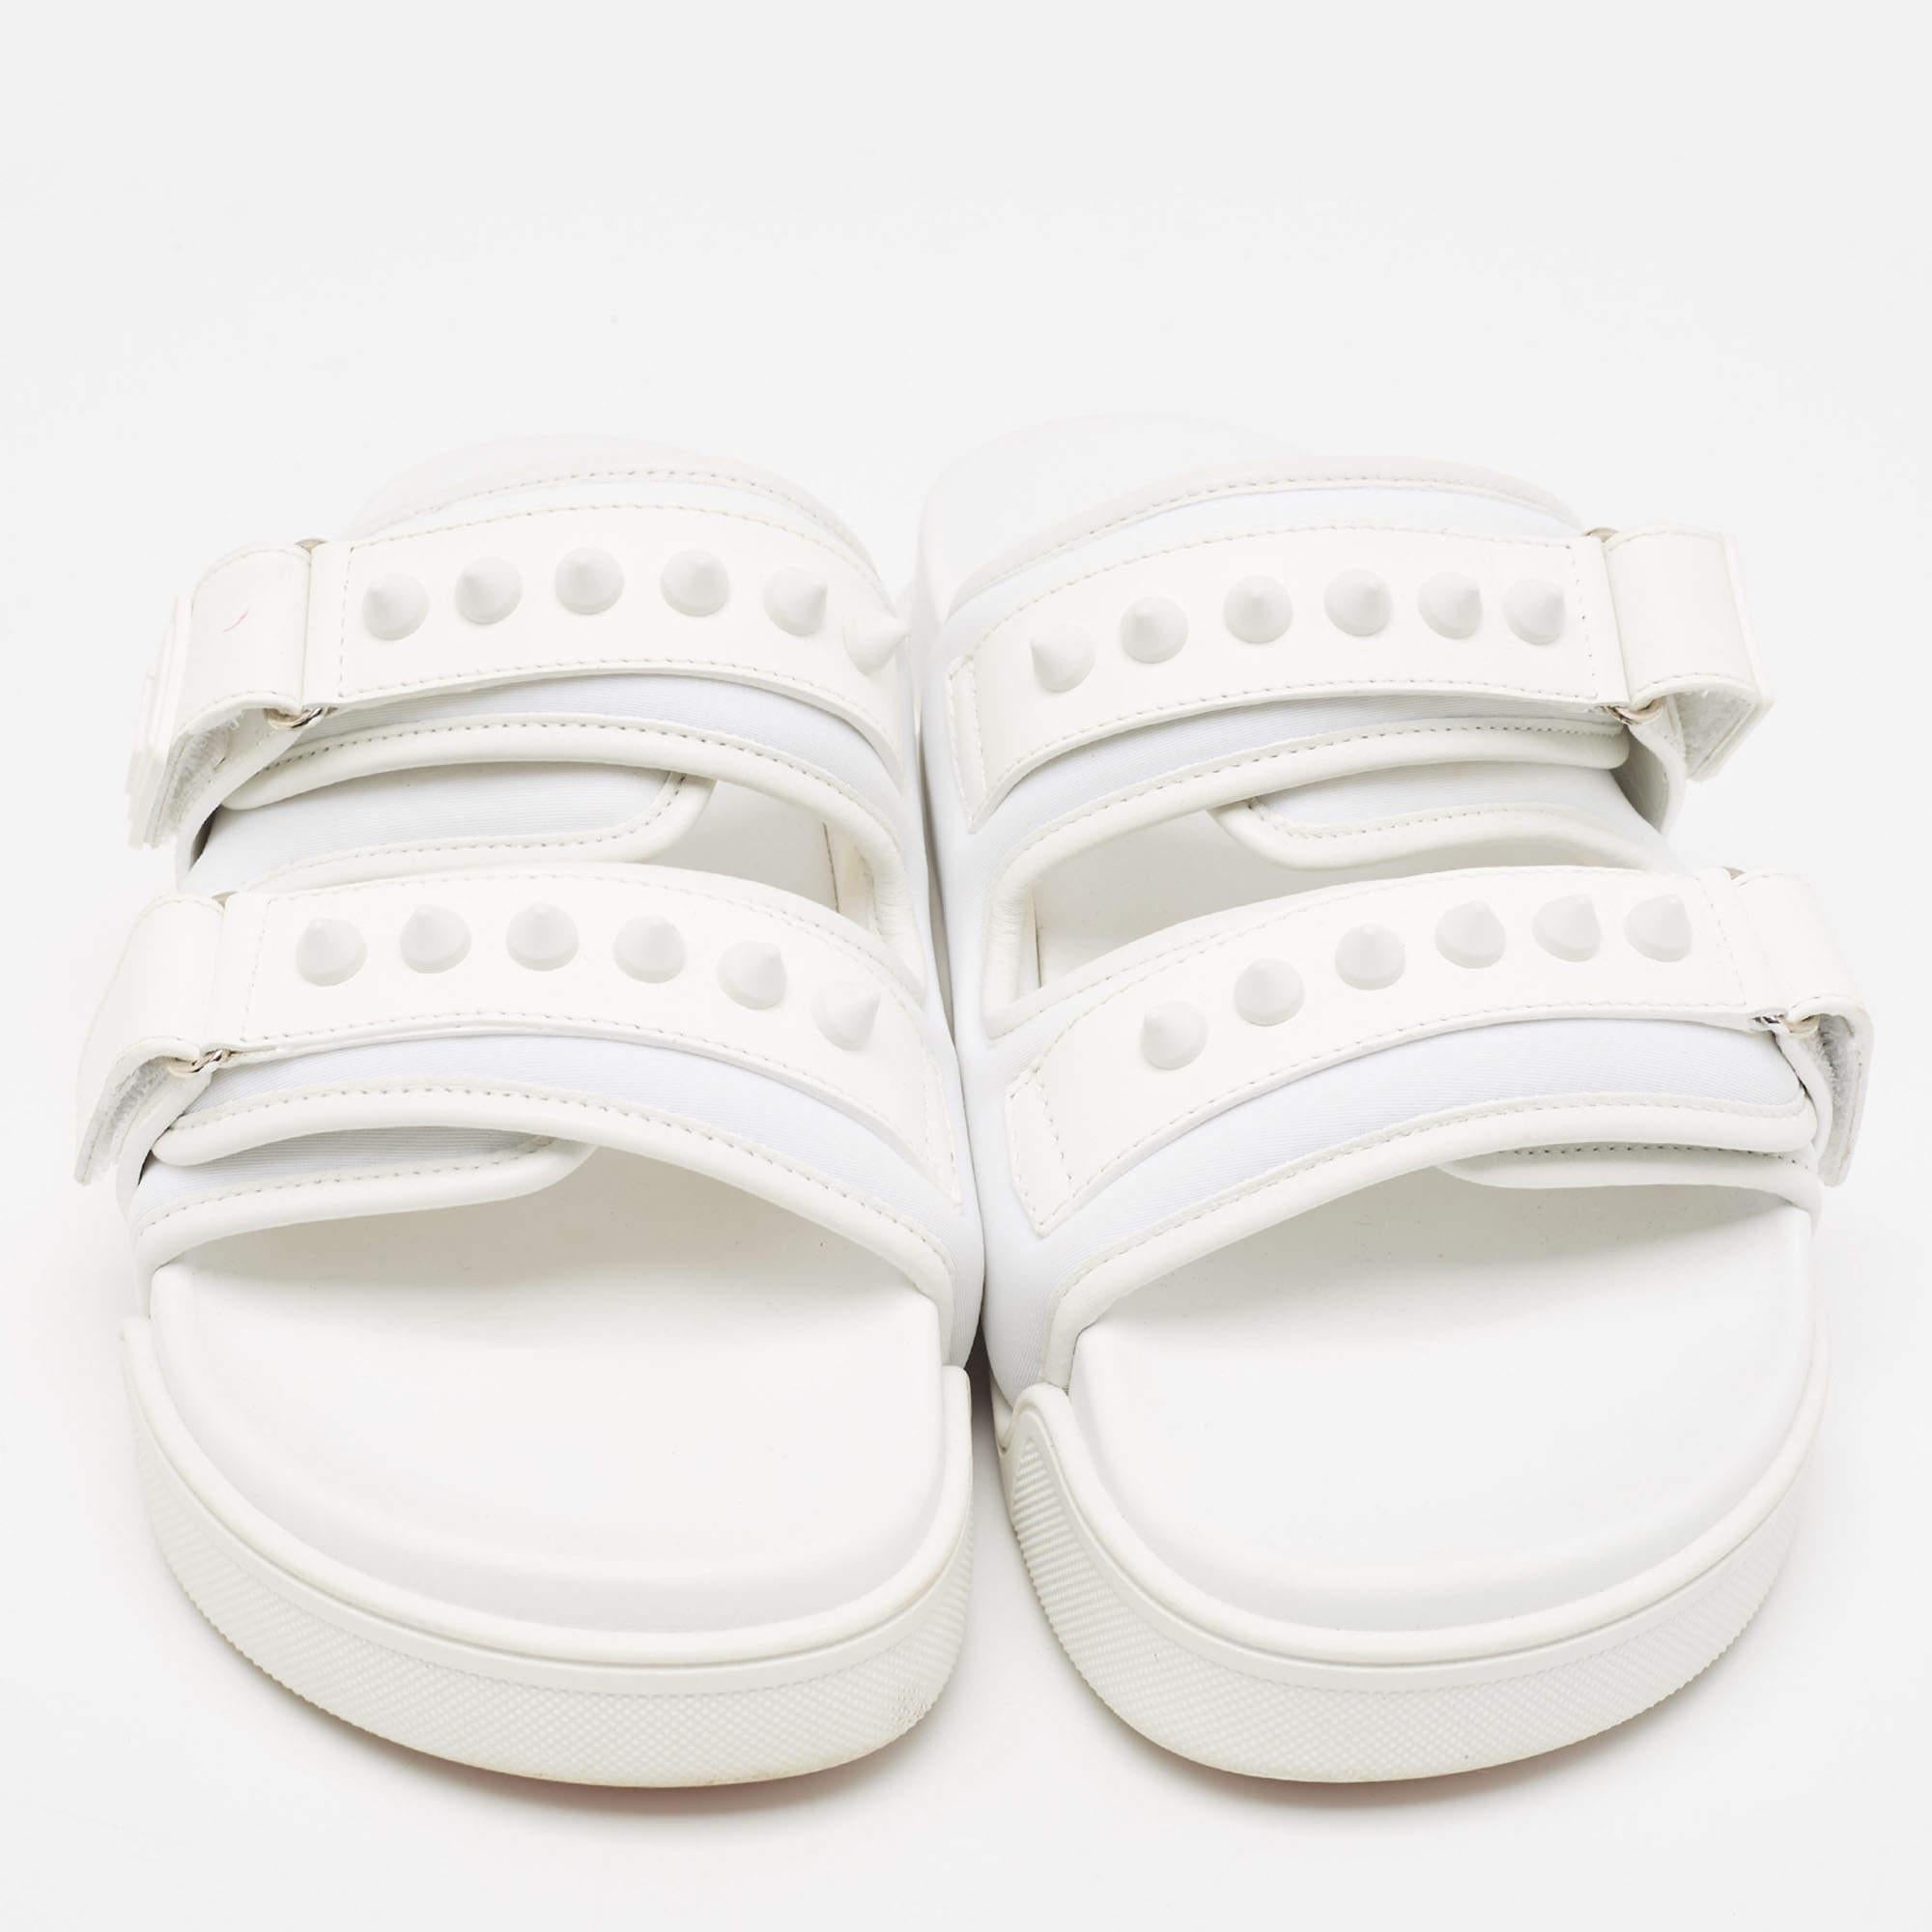 These white Christian Louboutin Daddy Pool sandals have got you covered for all-day plans. They come in a versatile design, and they look great on the feet.

